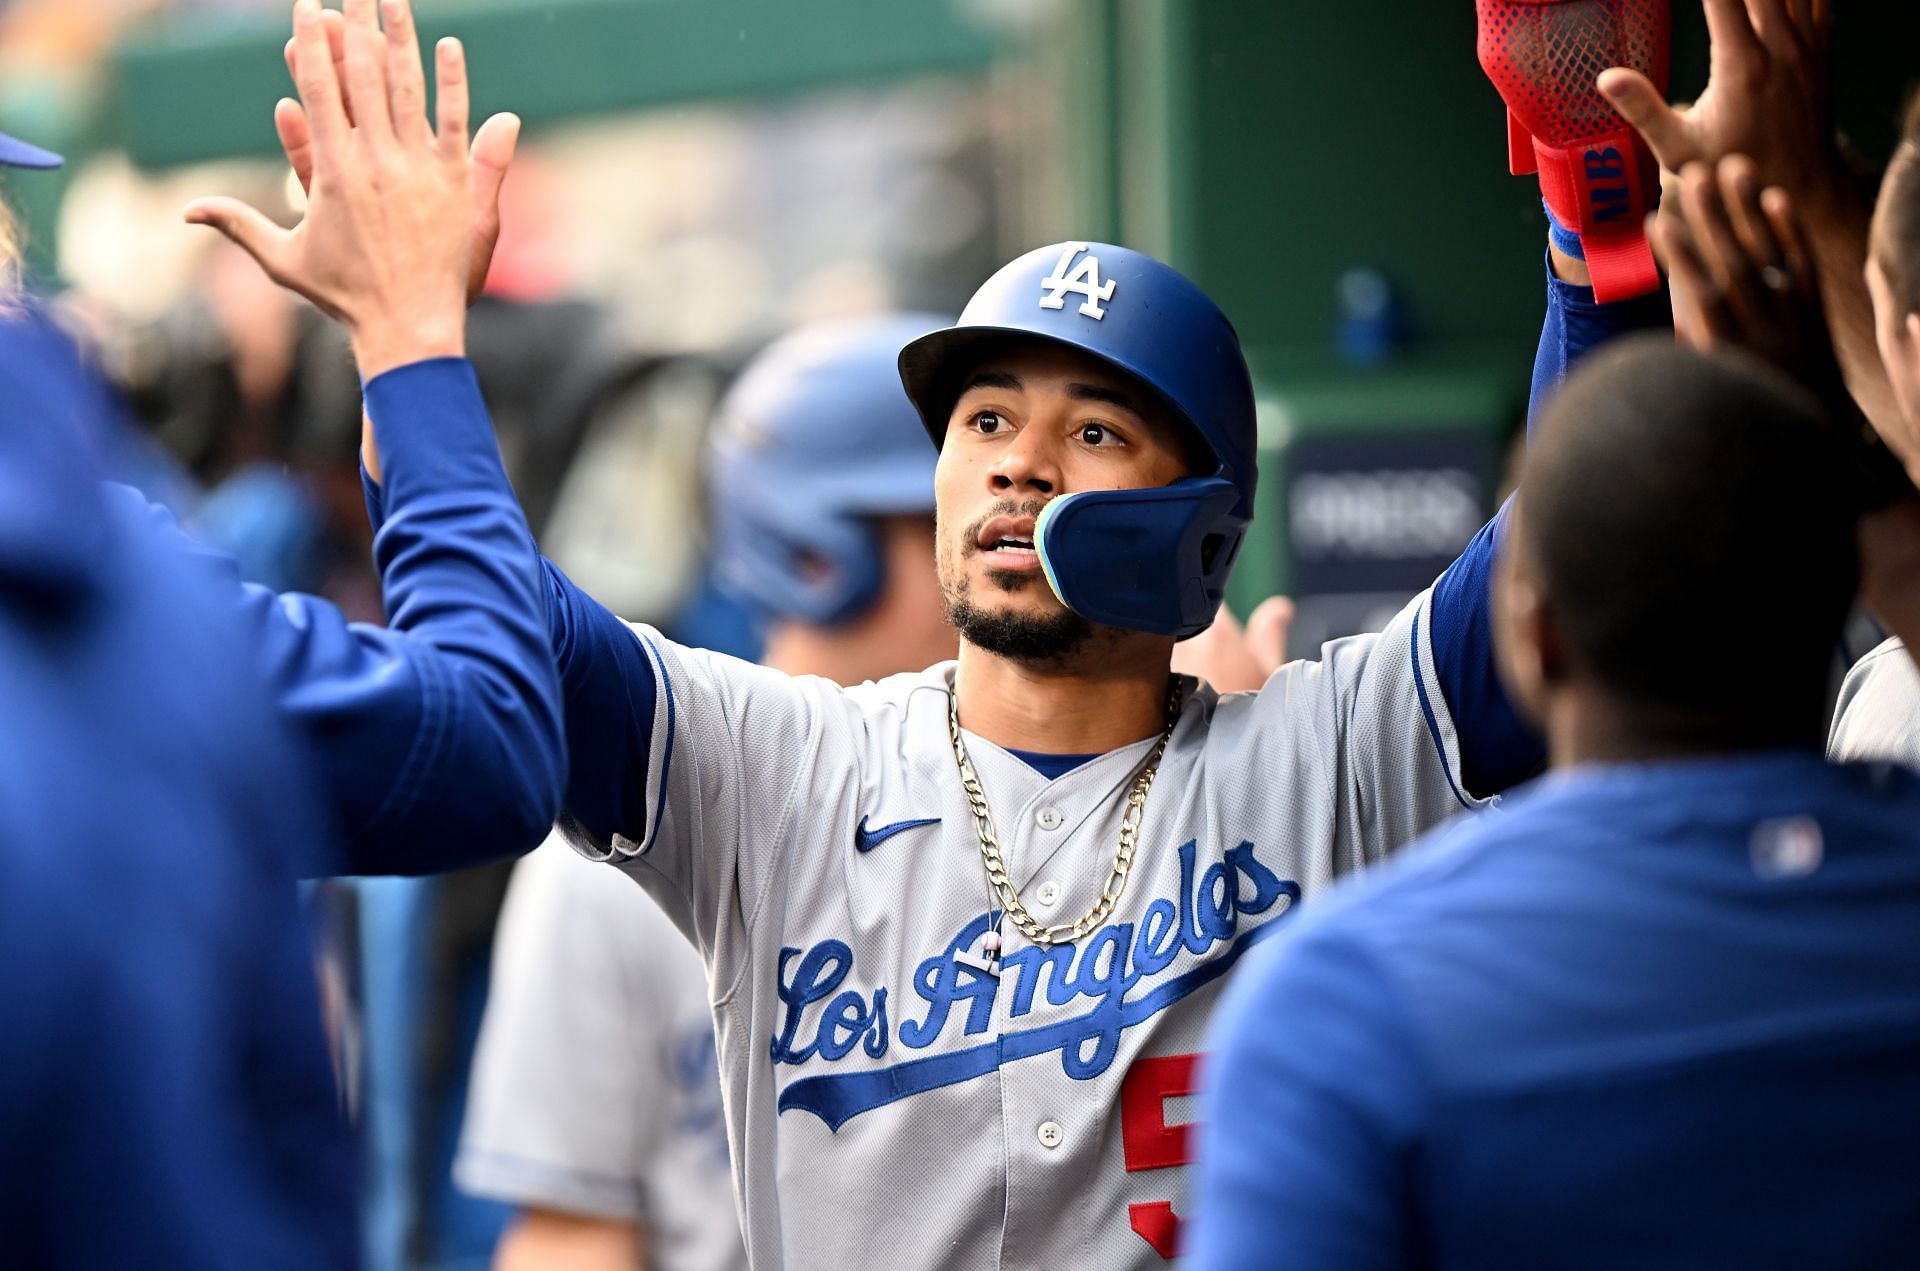 Dodgers' Mookie Betts sets MLB single-season record for RBIs by